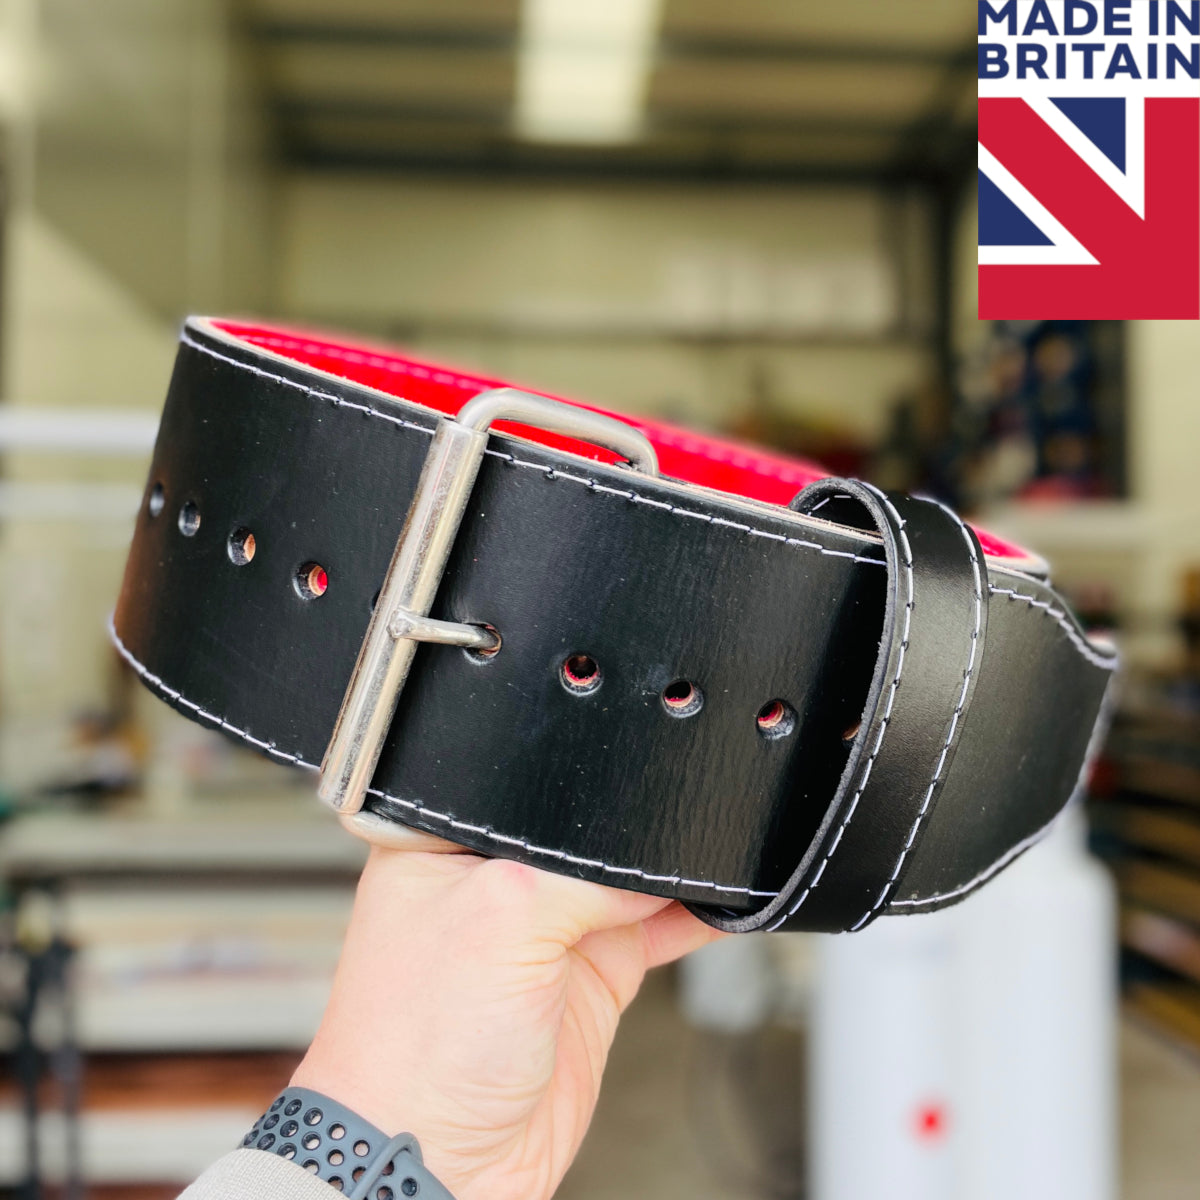 ModiFit Elite Stealth 10mm Single Prong Powerlifting Belt - Hand Made in UK - OLD LOGO - Small Only